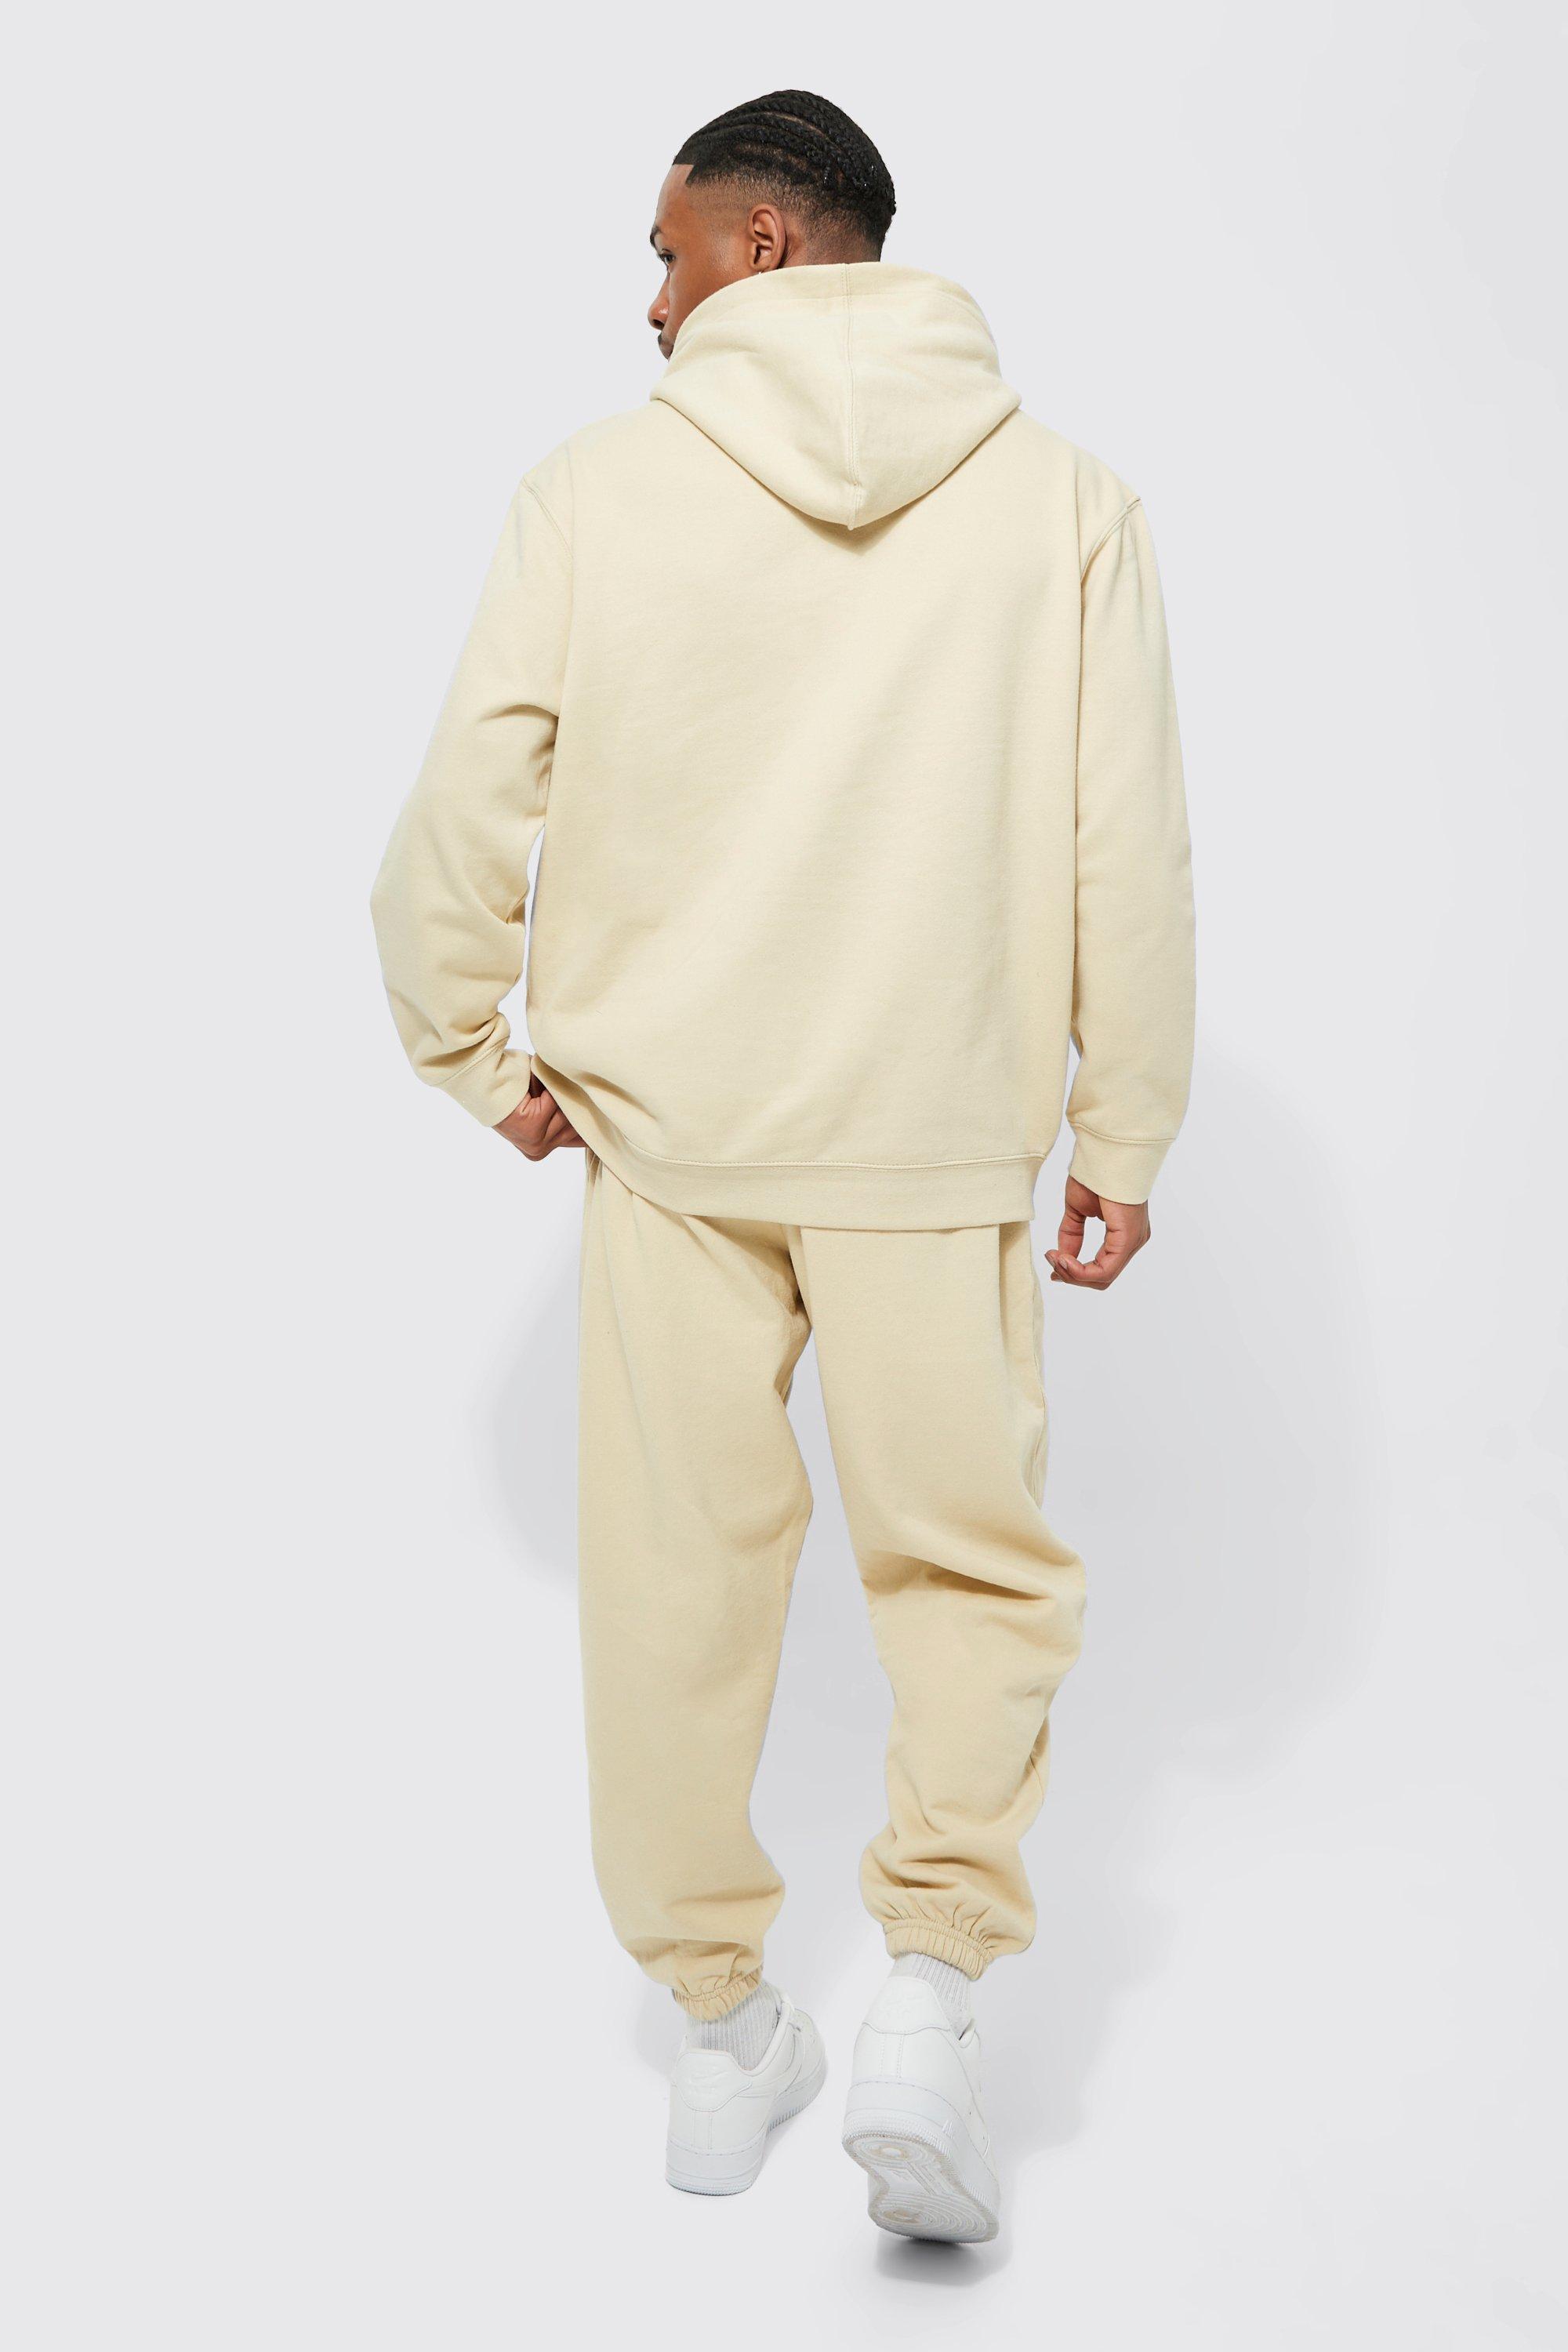 BoohooMAN Basic Oversized Fit Hoodie in Natural for Men | Lyst